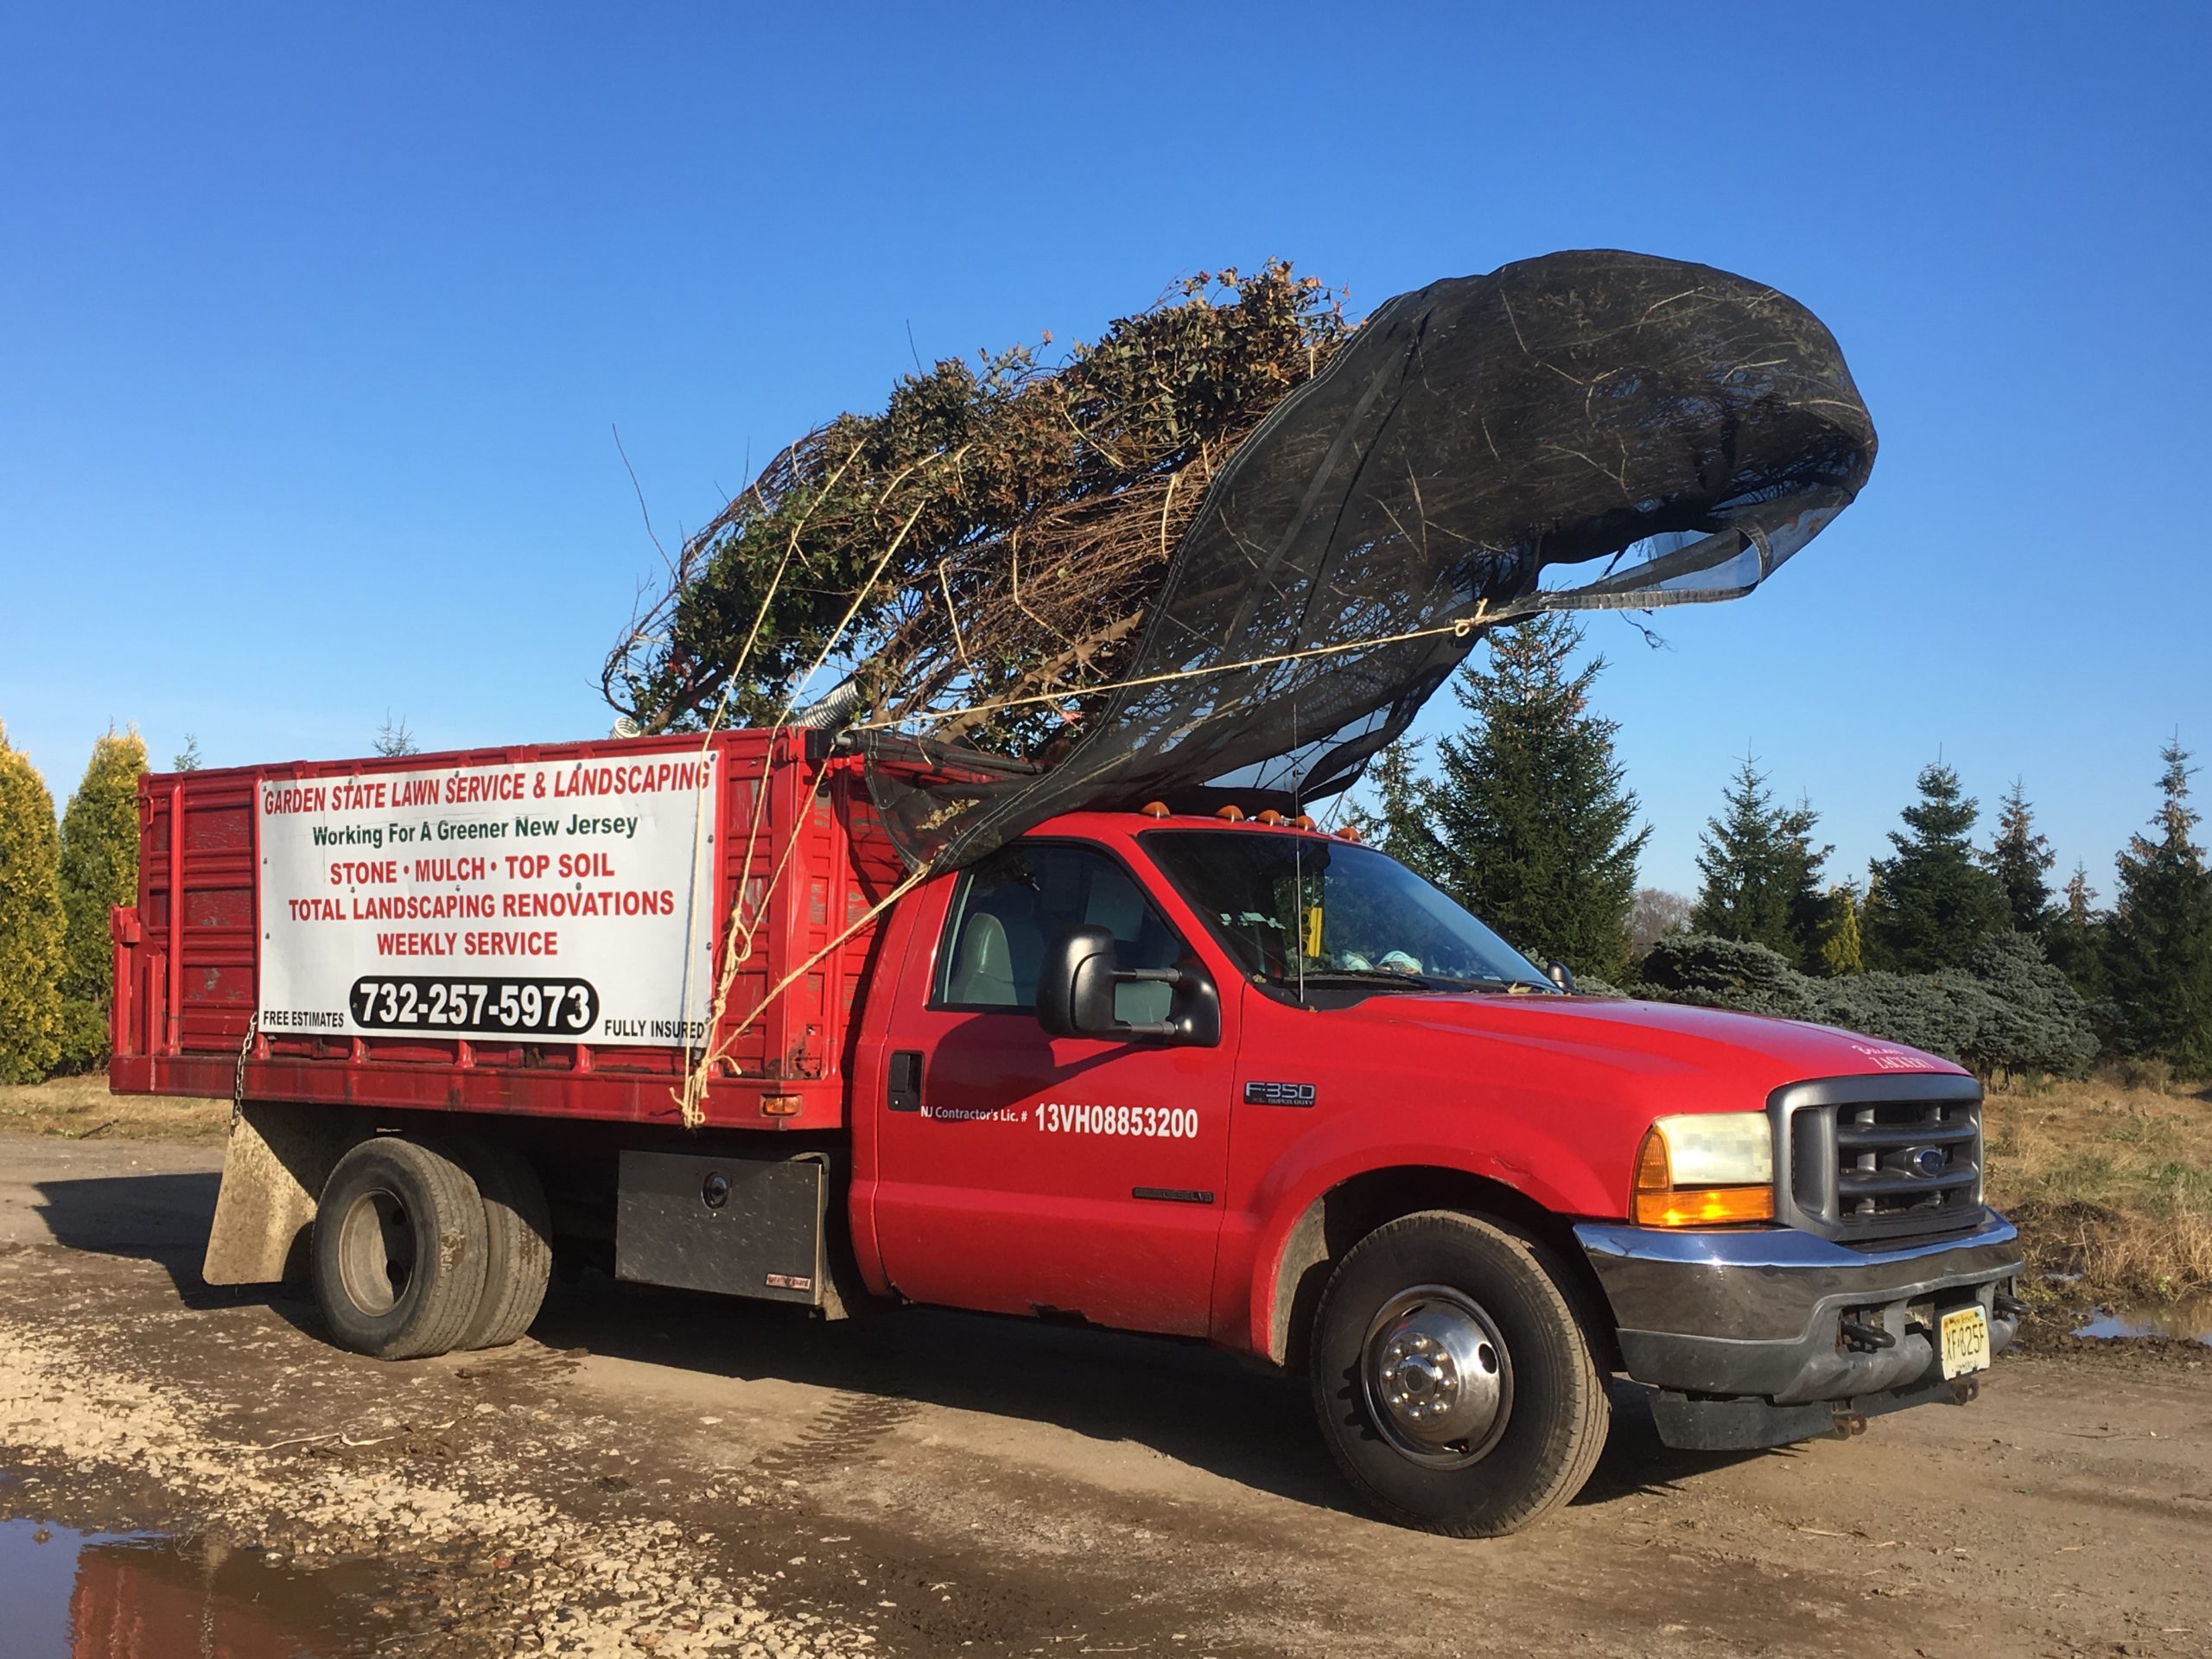 South River Shade Tree Commission – G.S. Lawn Svc & Landscaping, LLC